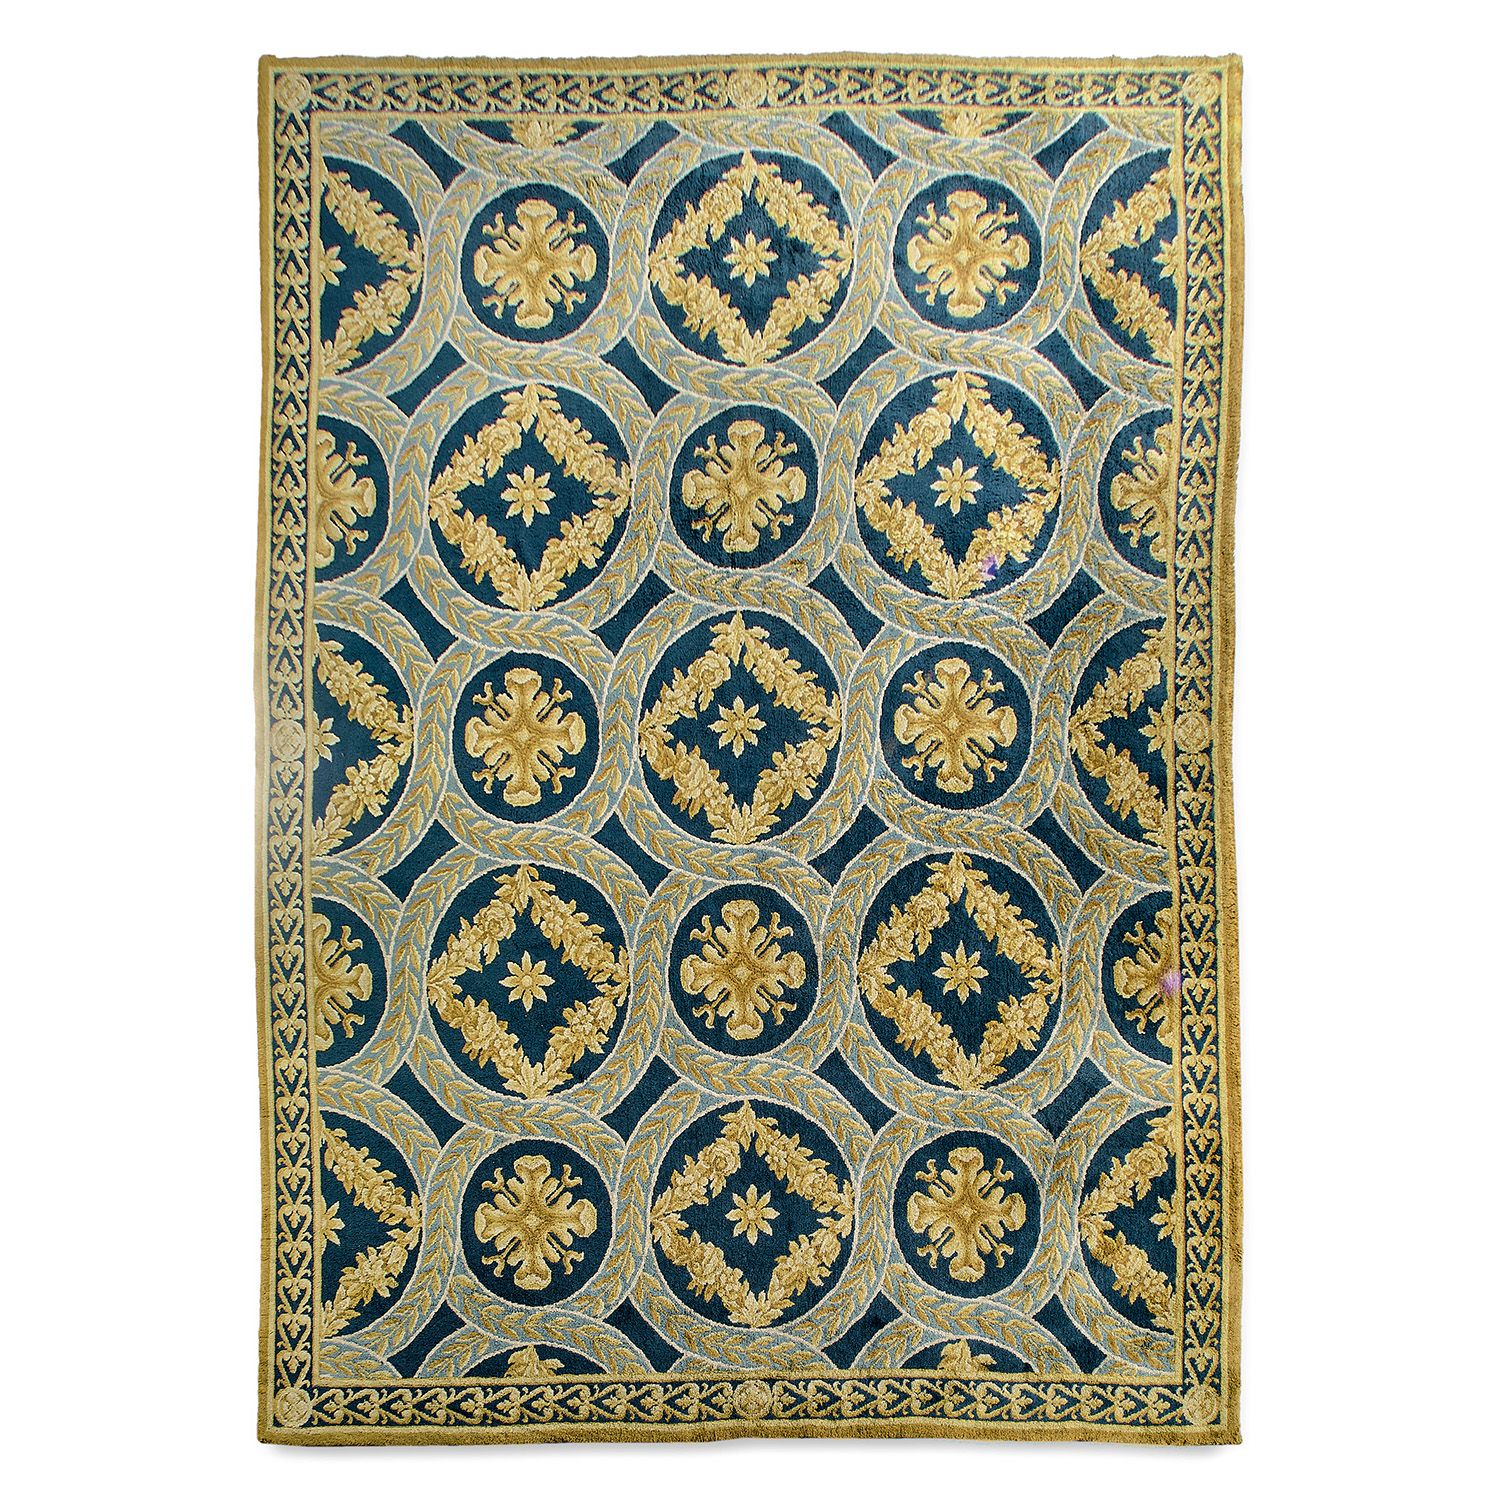 Null NARROW STITCH RUG, AUBUSSON, MIDDLE 20th CENTURY, NEOCLASSIC STYLE
blue bac&hellip;